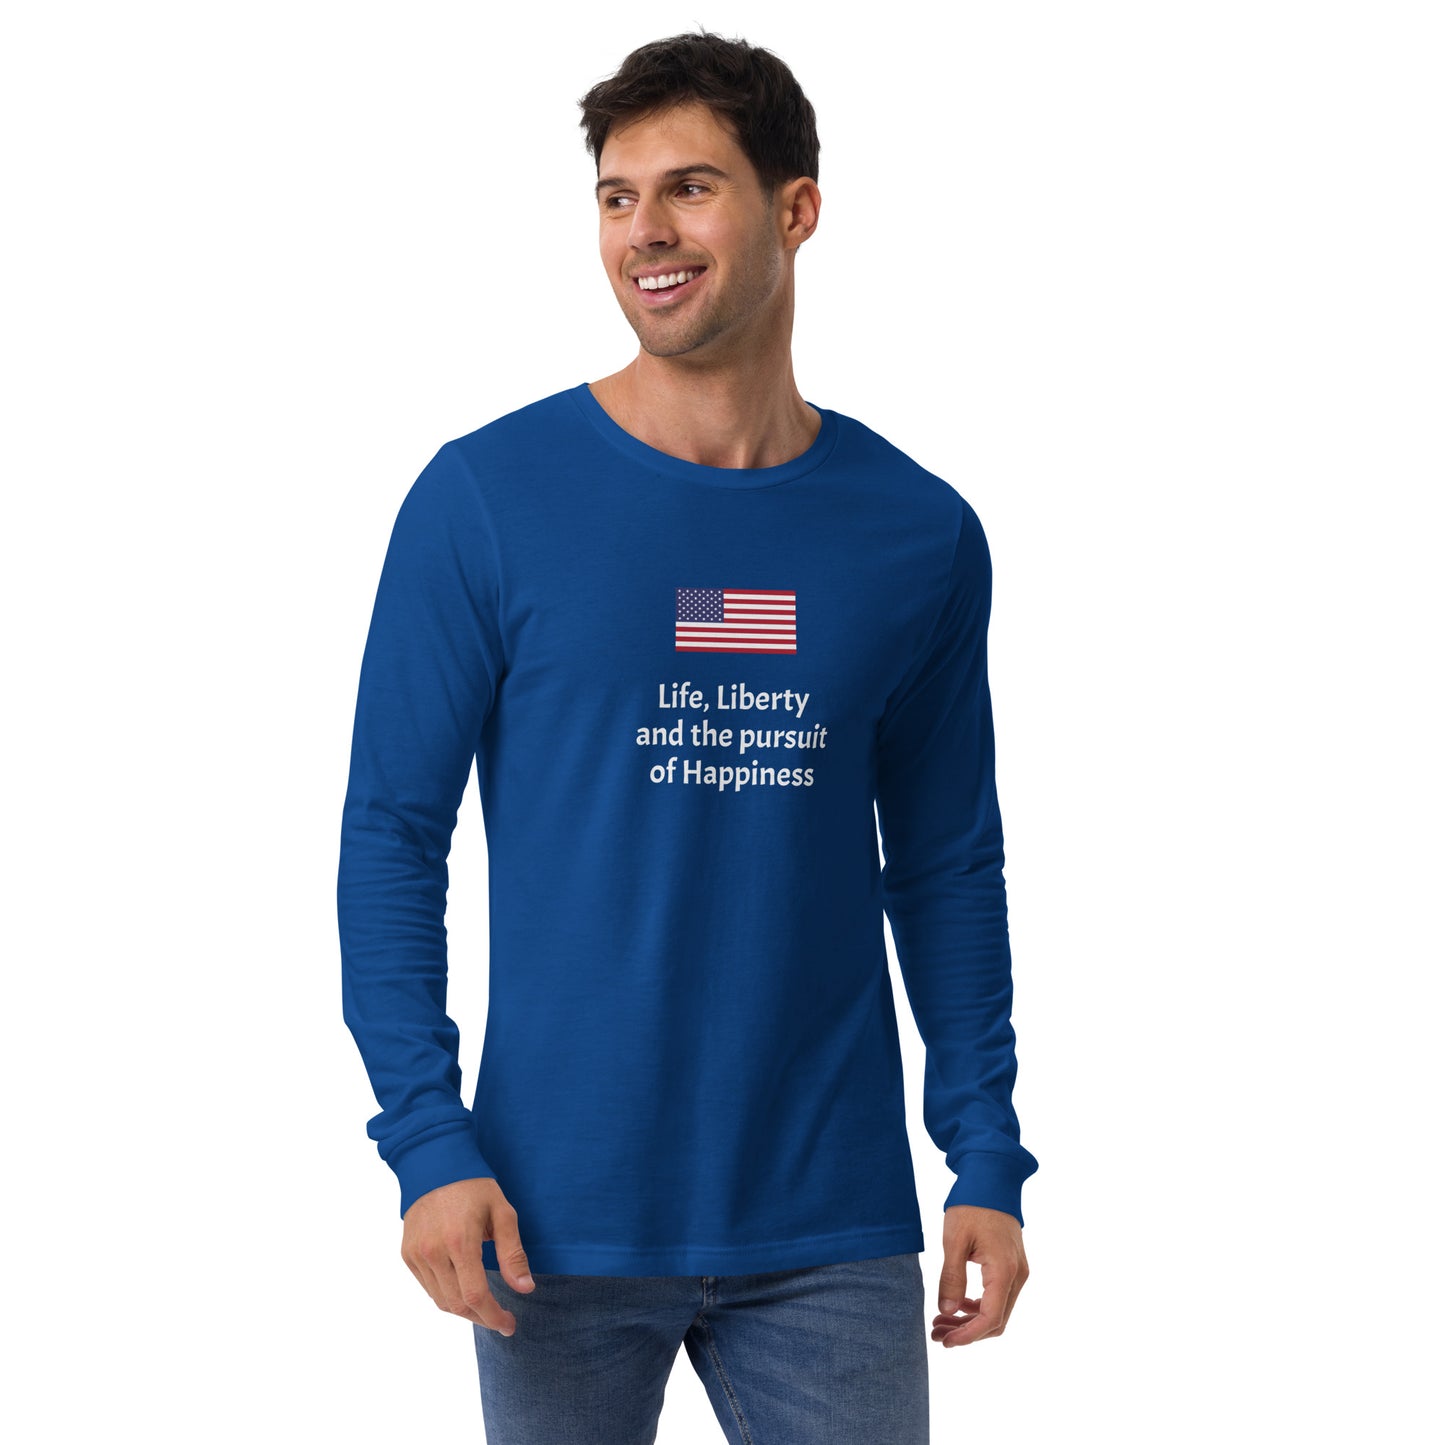 Life, Liberty and the pursuit of Happiness unisex long sleeve tee